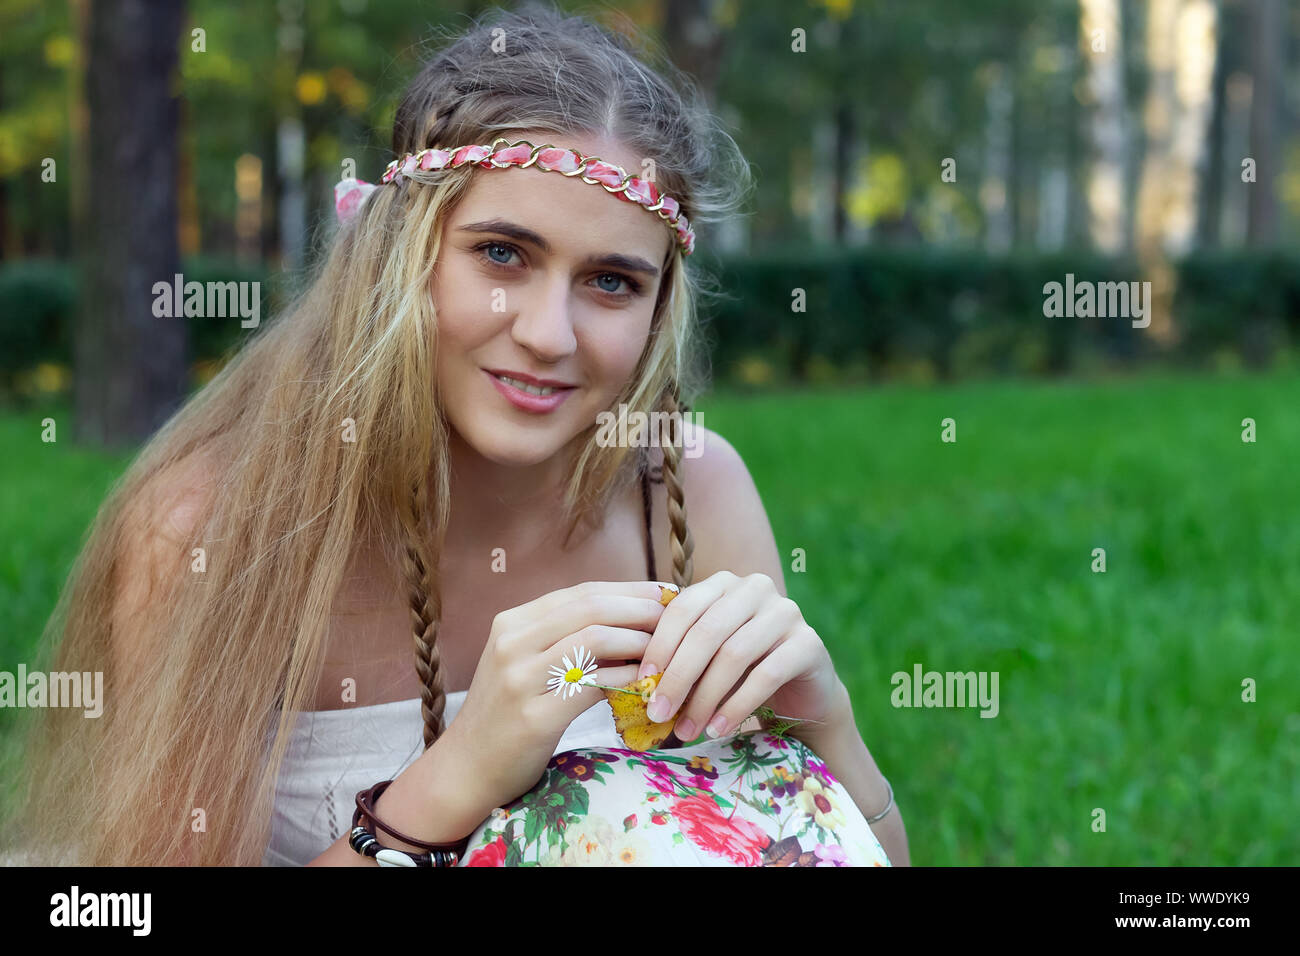 hippie girl portrait smile   emotion  vibes  attractive free Stock Photo